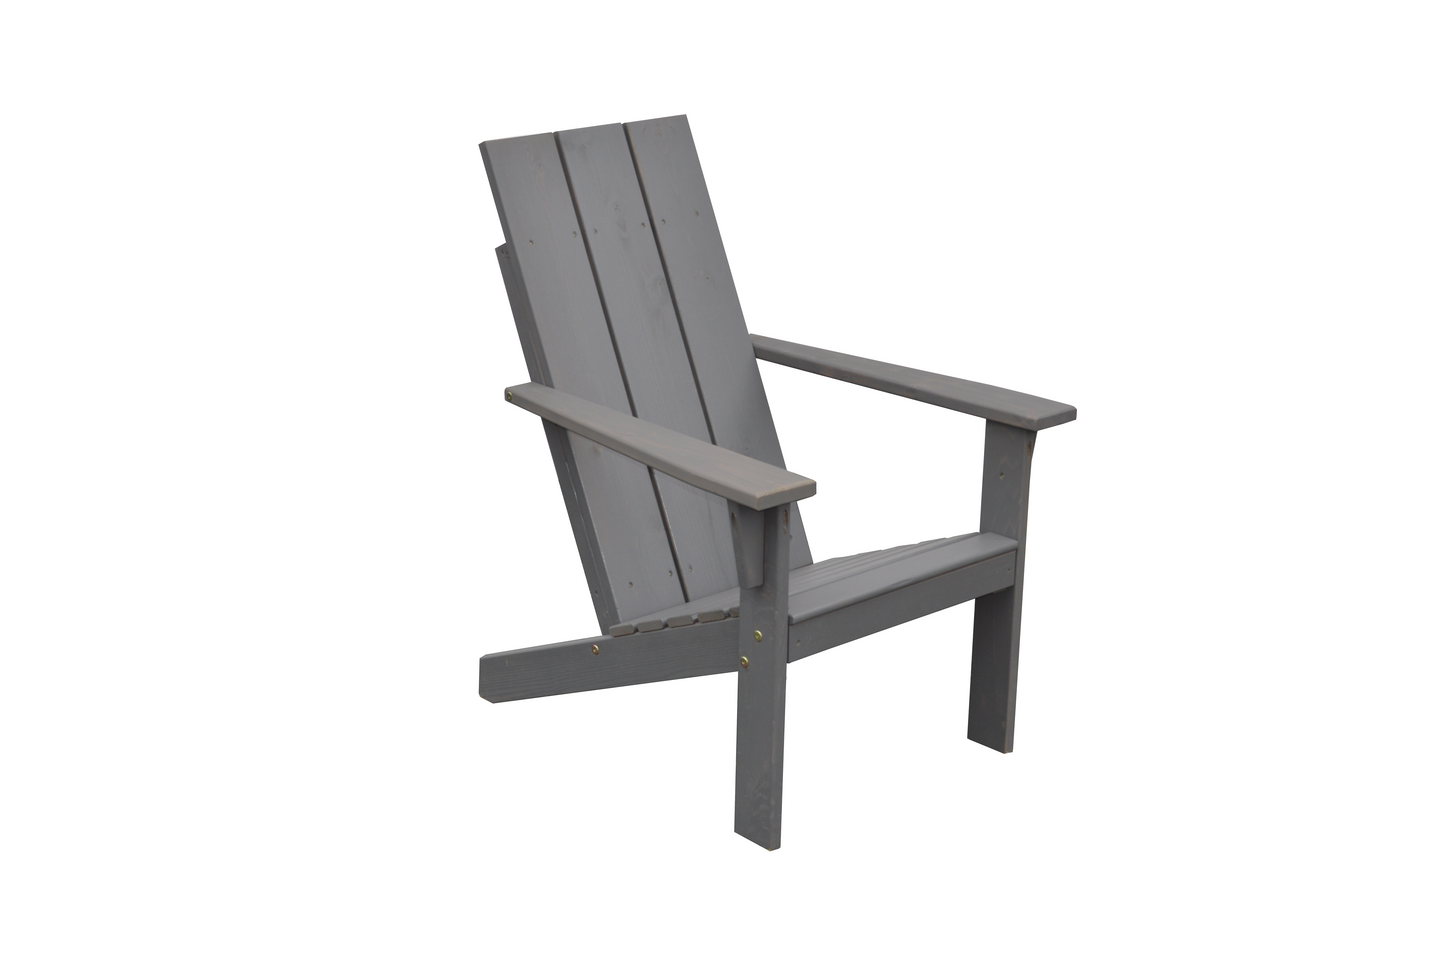 A&L FURNITURE CO. Western Red Cedar Modern Adirondack Chair - LEAD TIME TO SHIP 4 WEEKS OR LESS